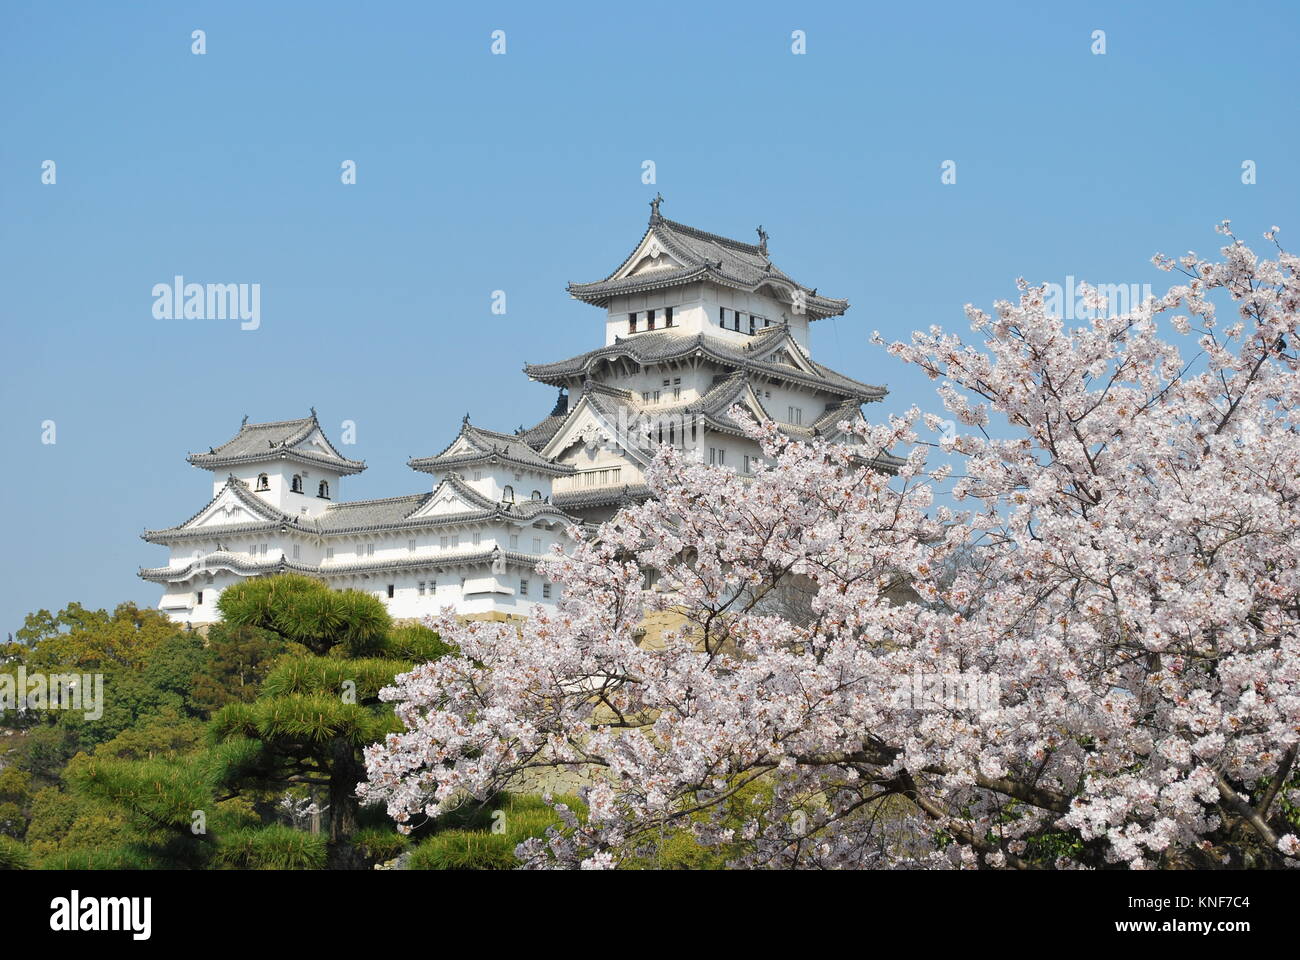 Cherry blossoms in full bloom in spring at Himeji castle, Japan. A symbol of respect, power, glory, history, and peace. Stock Photo